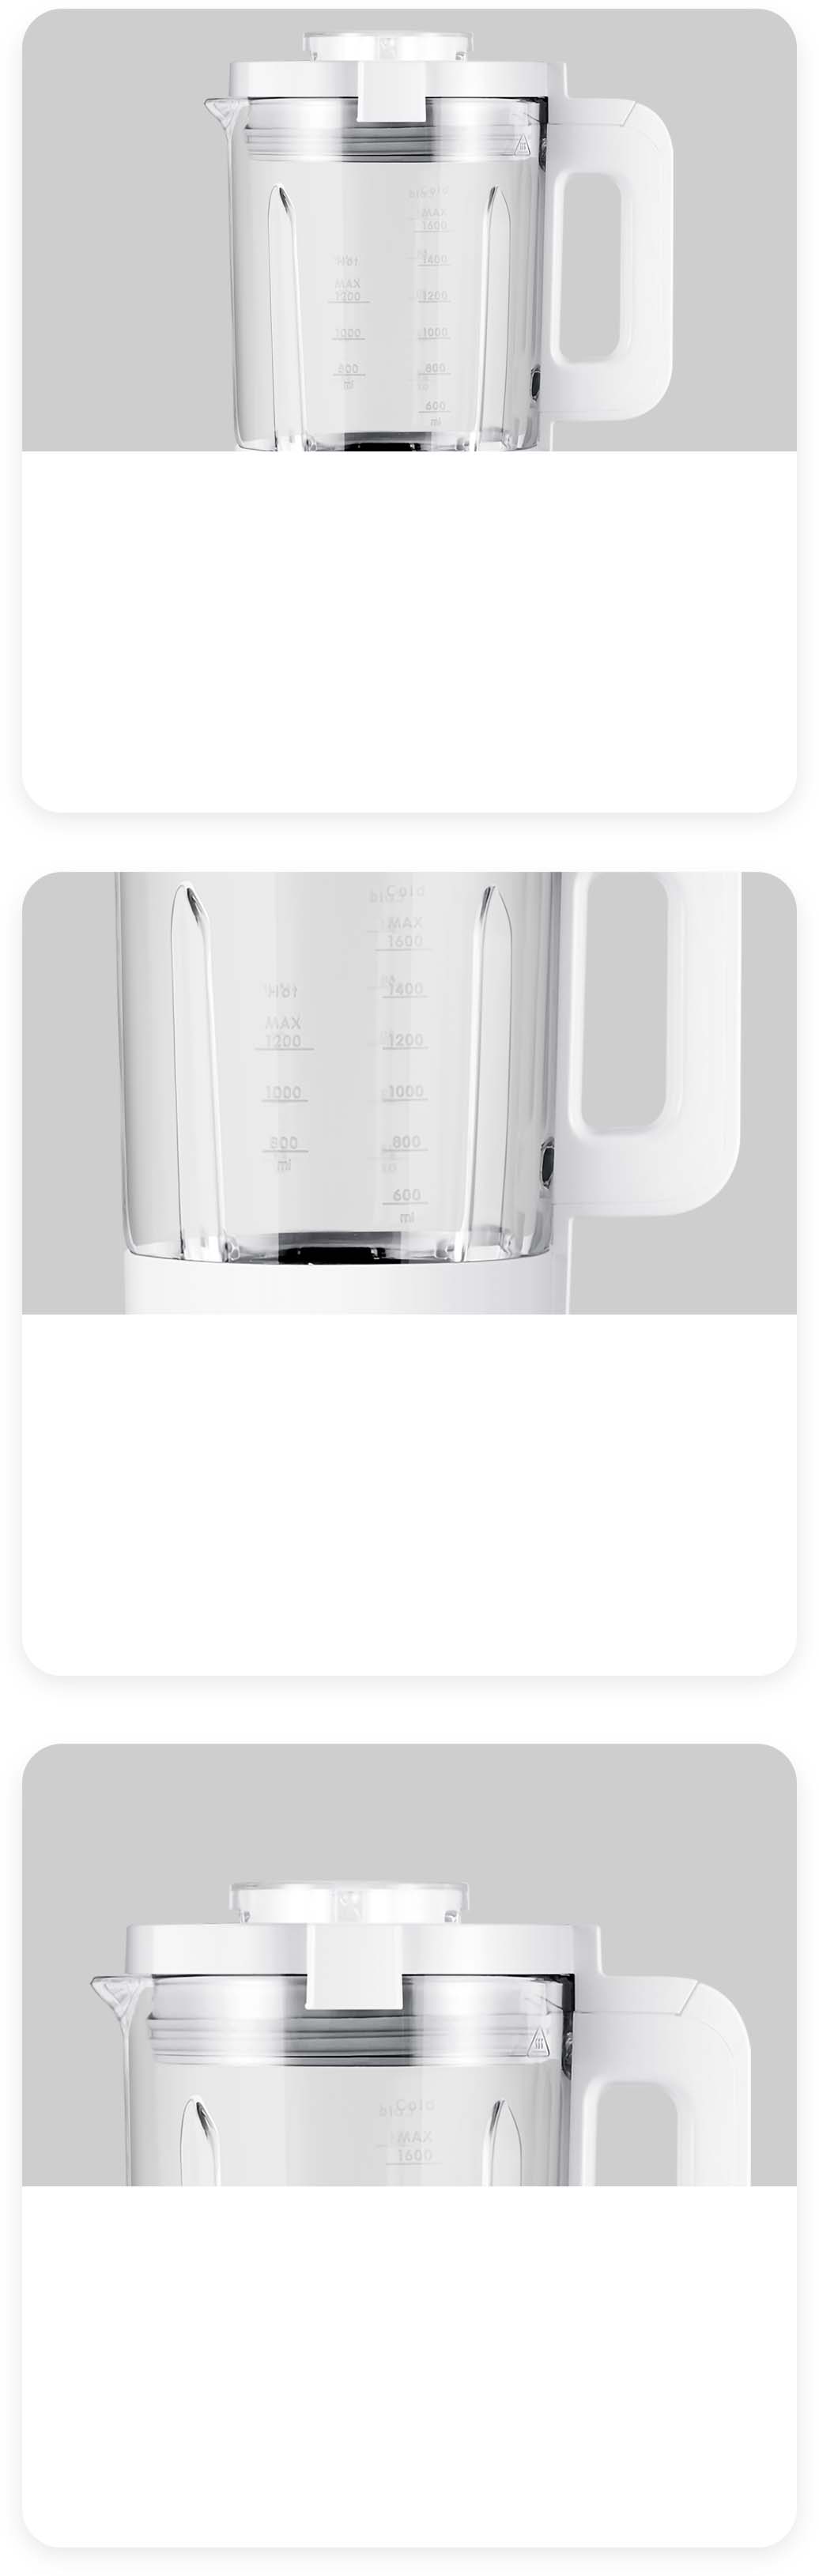 User manual Xiaomi Smart Blender (English - 131 pages)